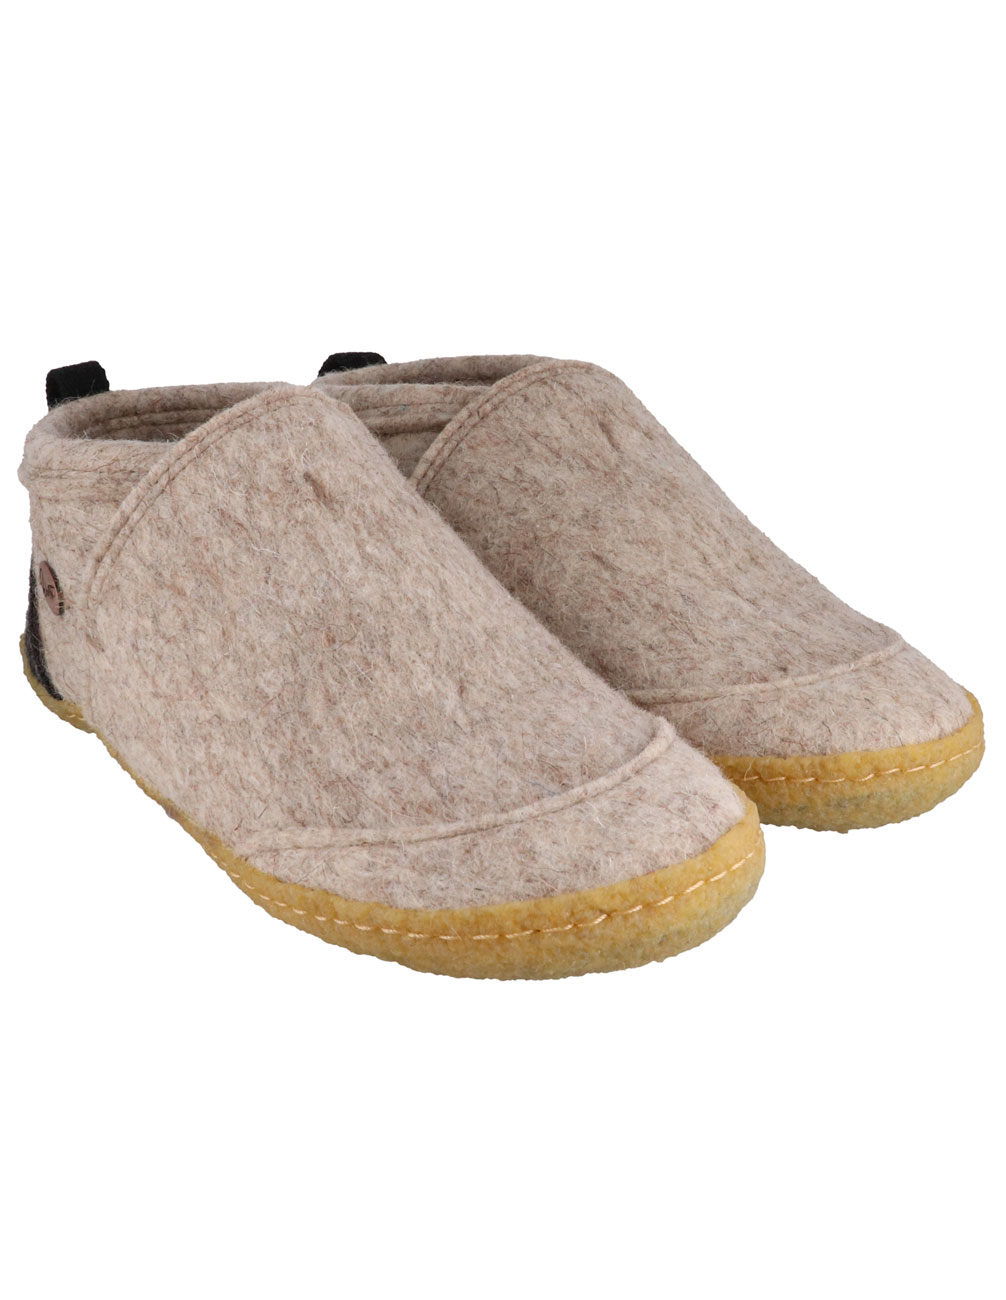 WoolFit® Slippers for the Office 'Taiga' with natural R